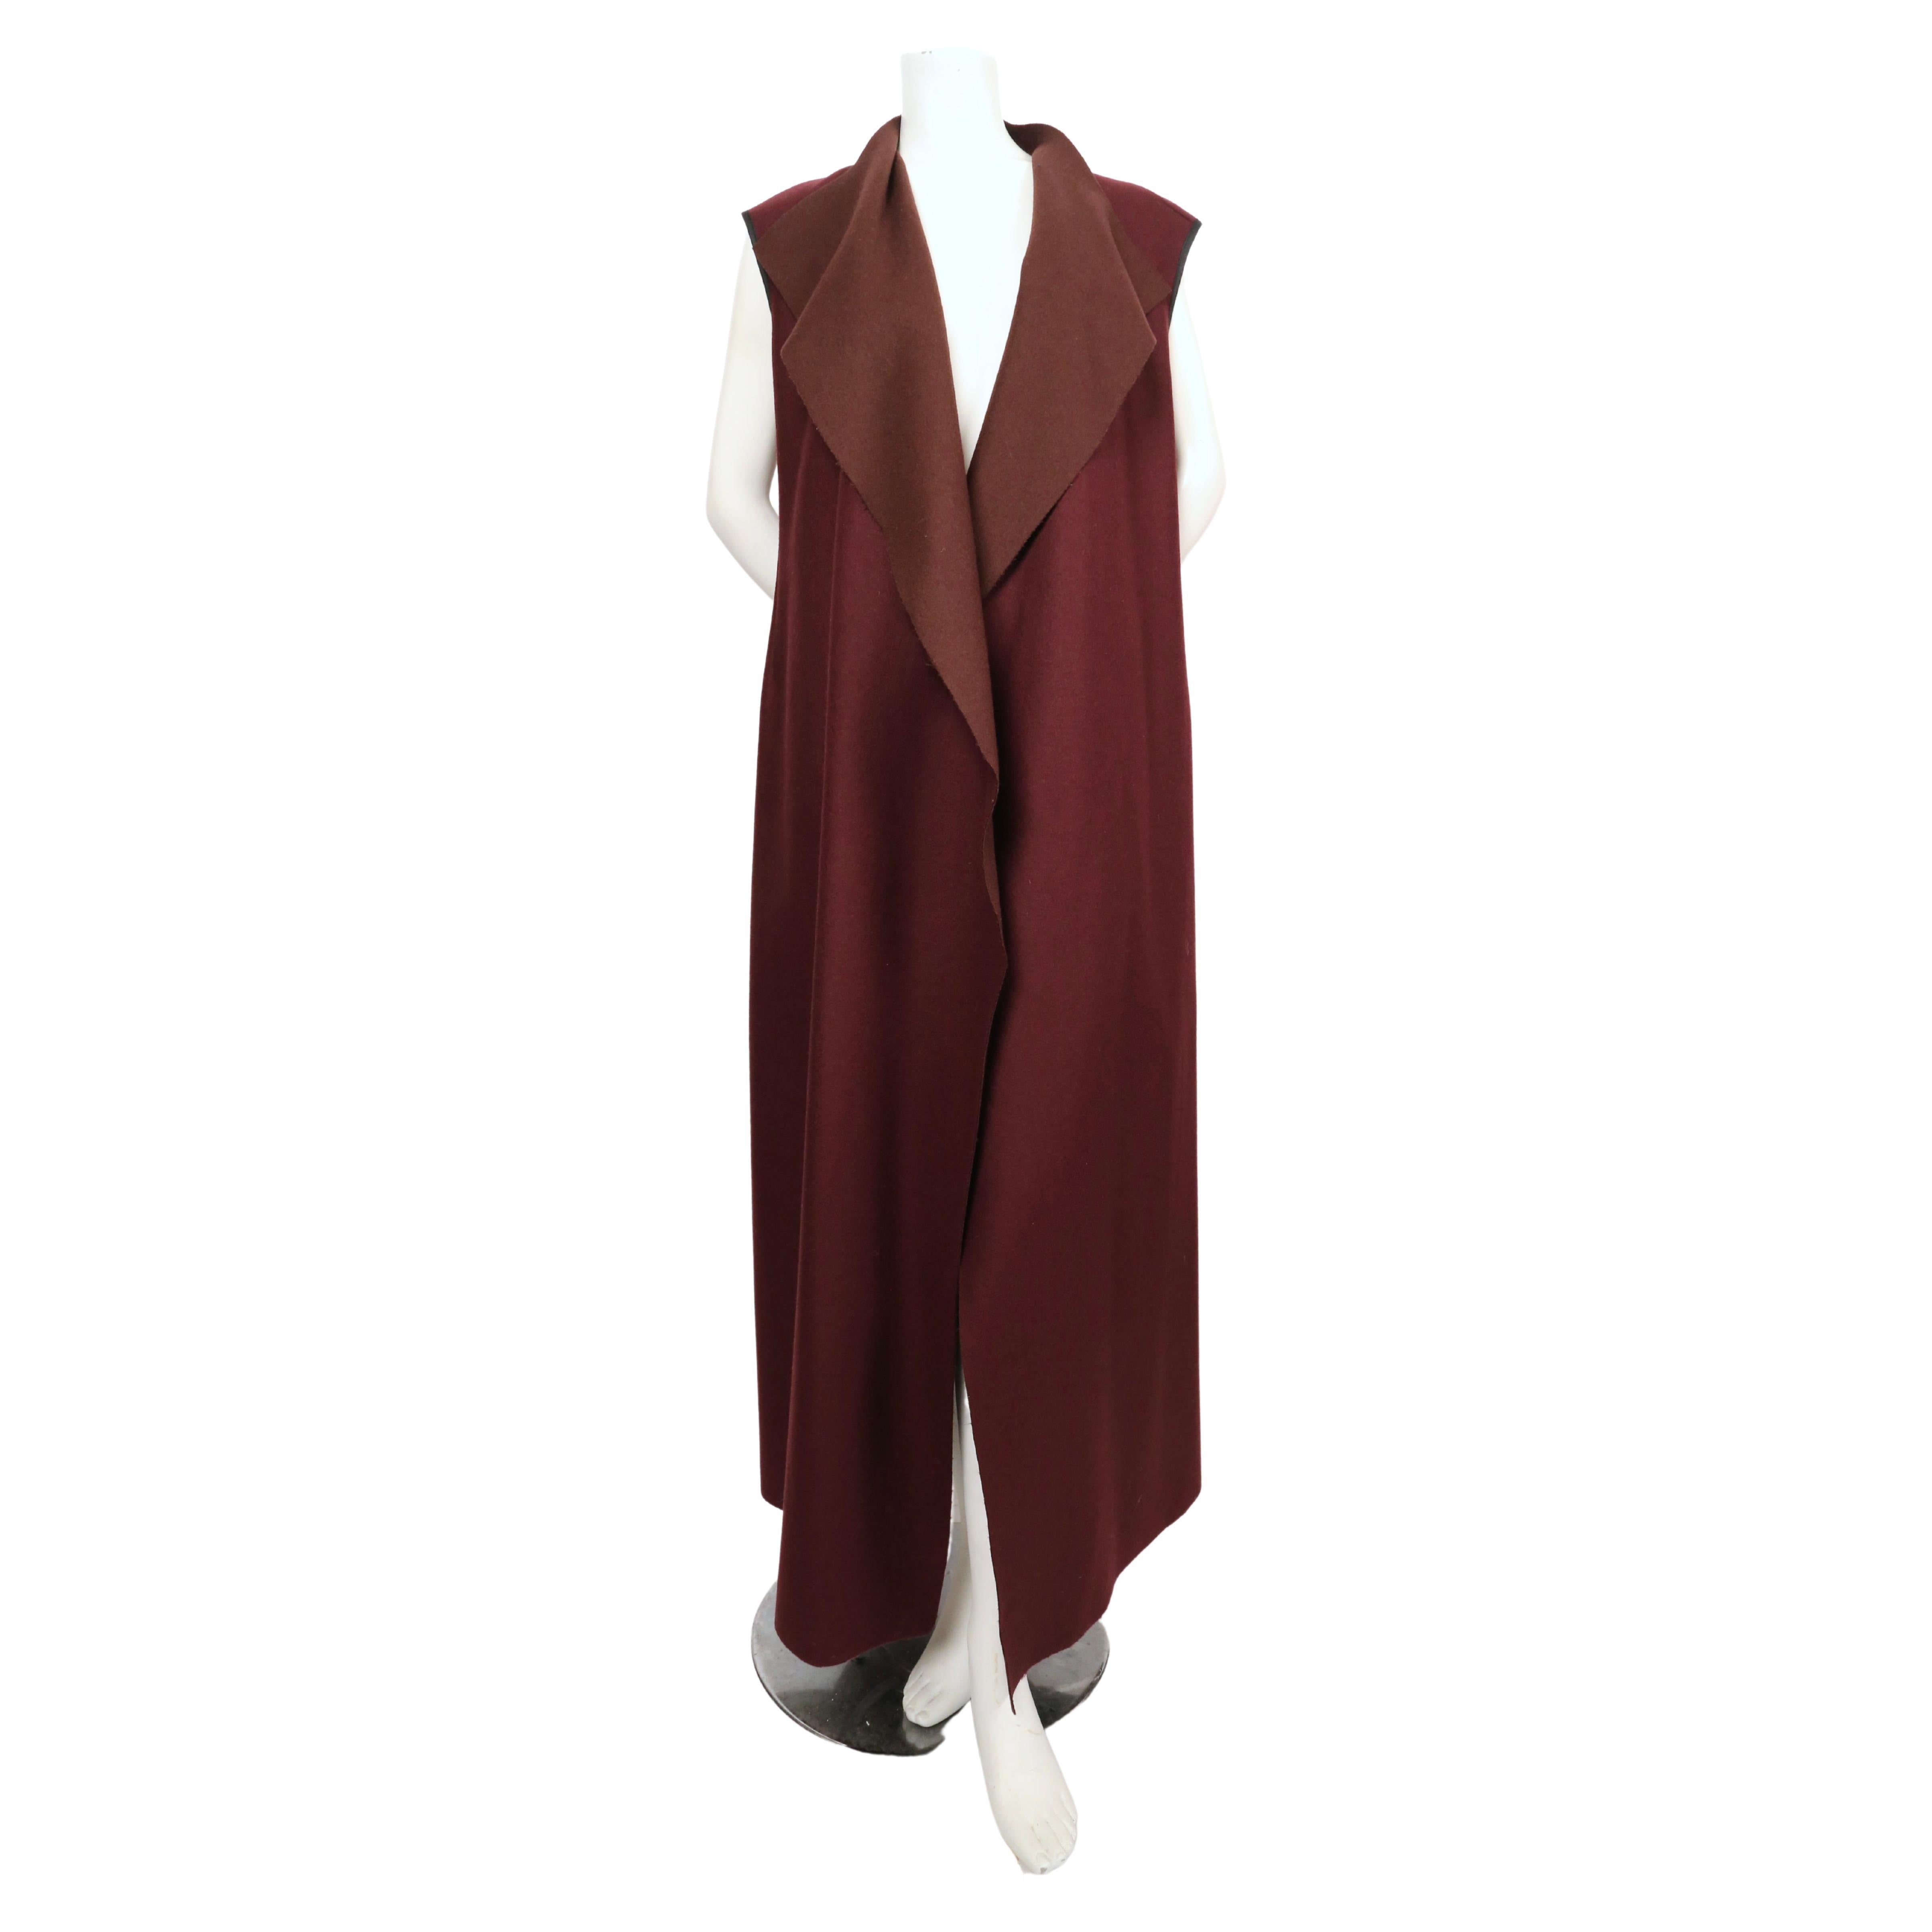 Dramatic, maxi-length, sleeveless wool coat with open closure from Dries Van Noten dating to the early 1990's. French size 38. Approximate measurements: shoulder 18